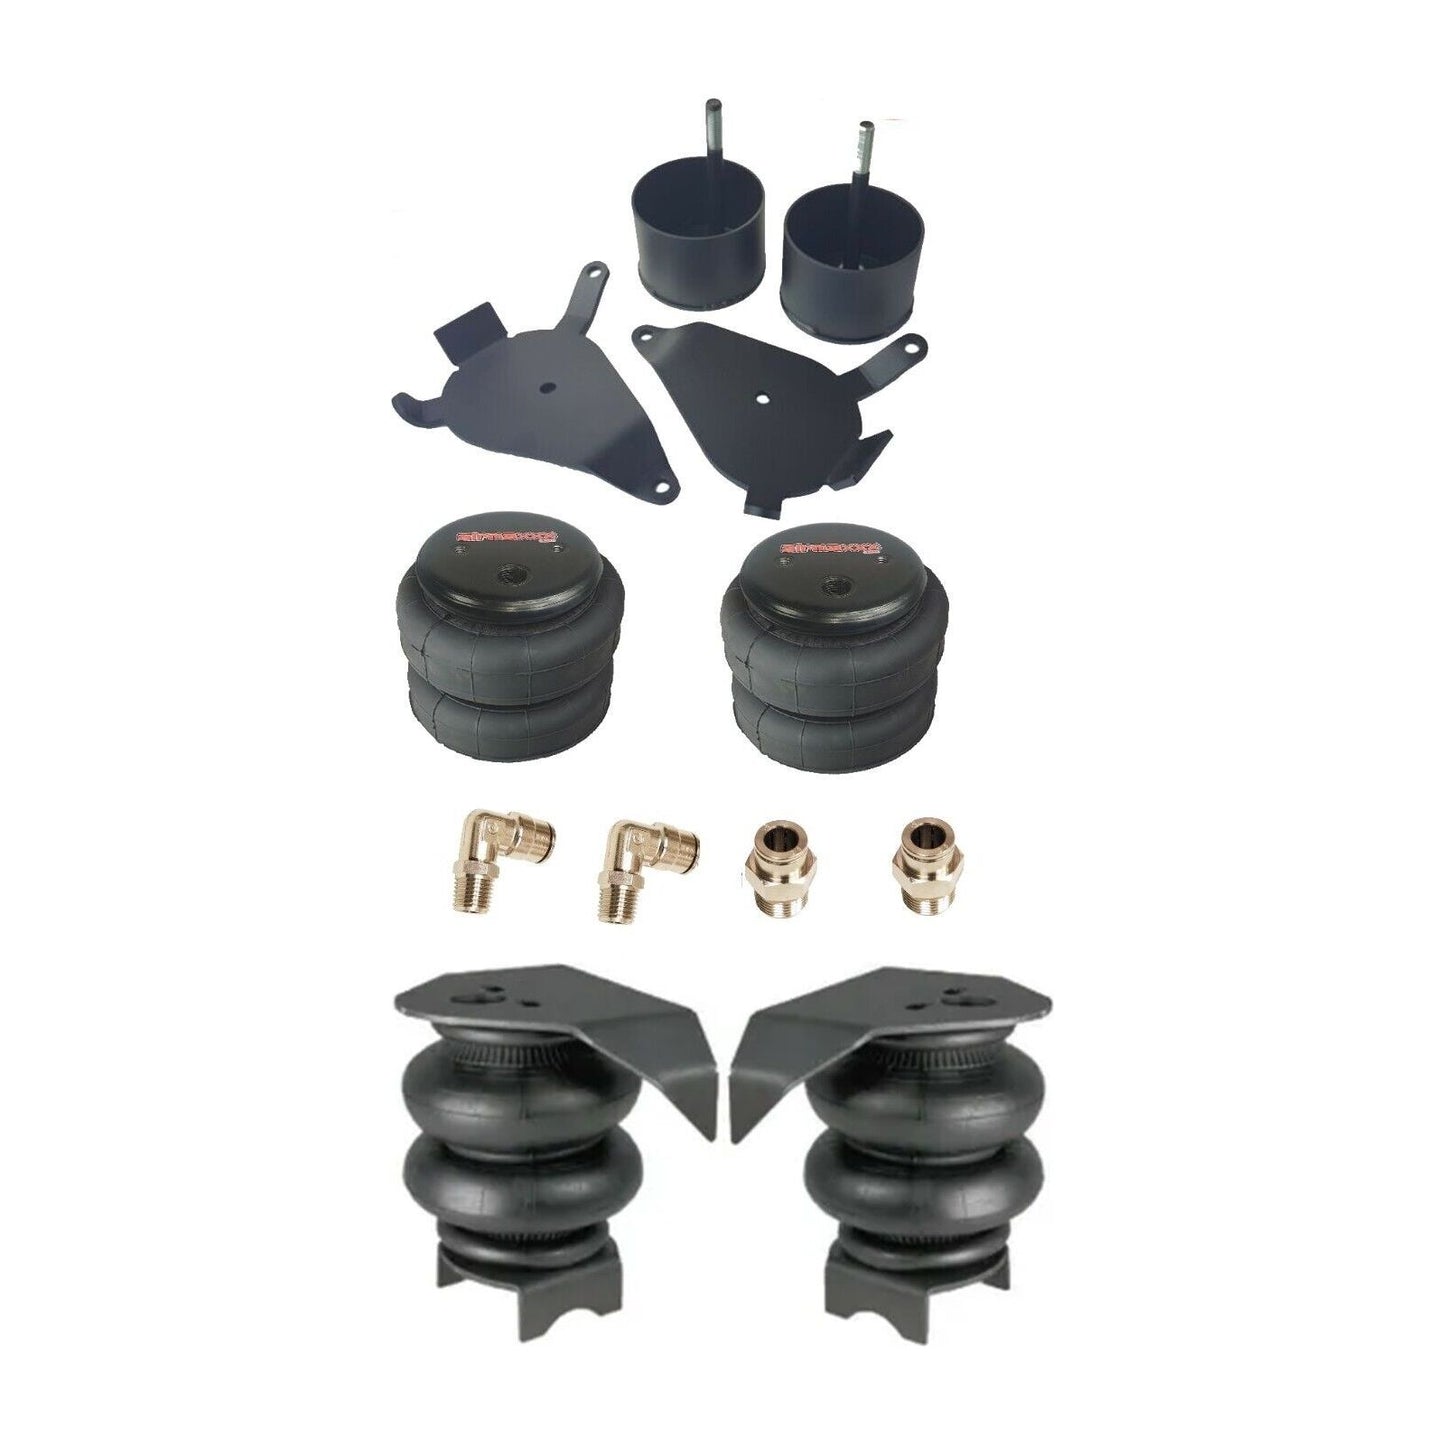 Complete airmaxxx Air Suspension Kit 3/8" Manifold Bags Black 480 Fits Chevy 1982-04 S10 2wd